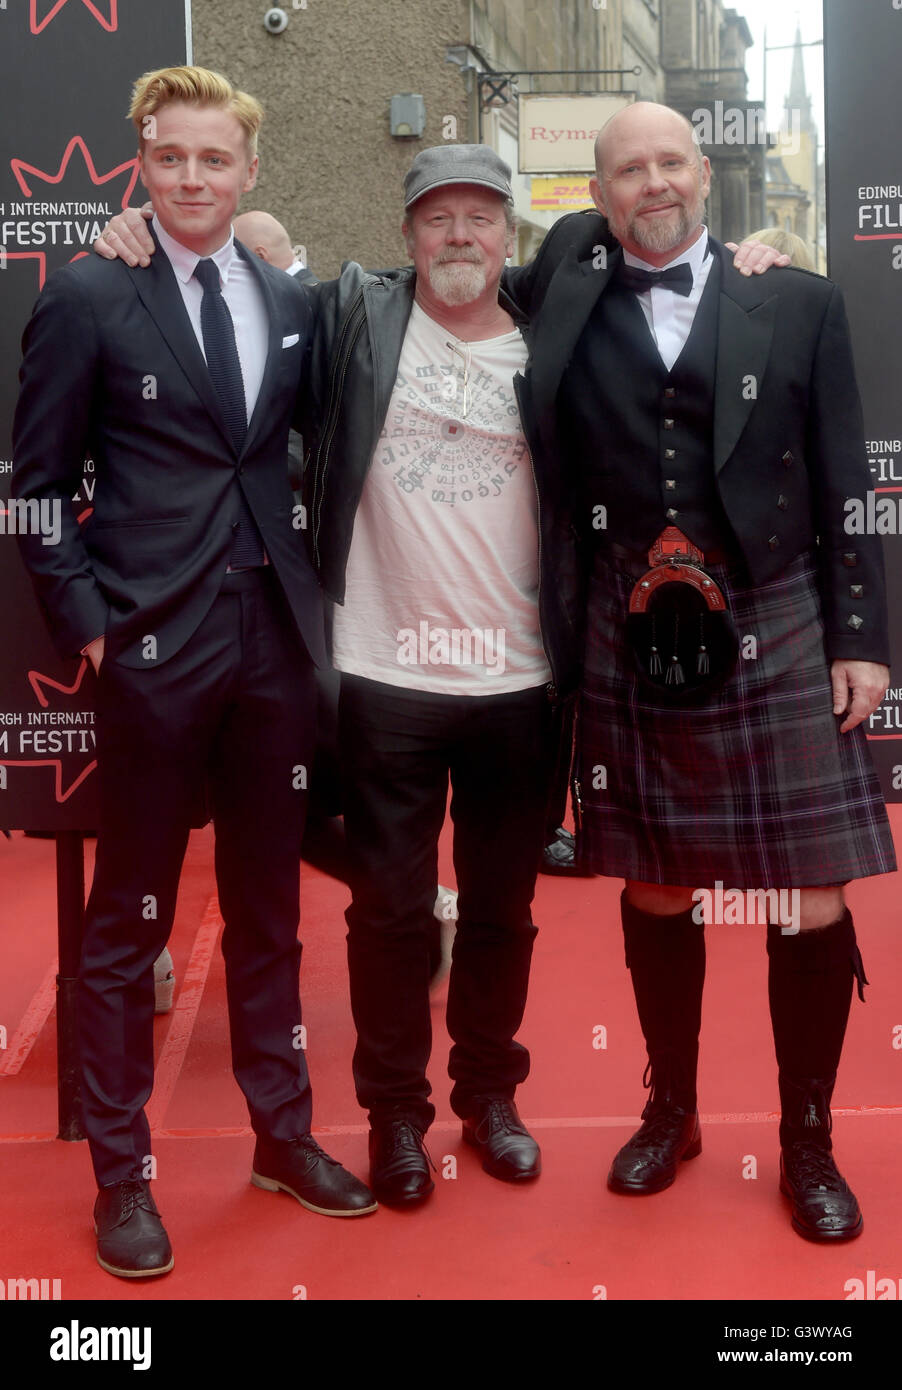 (left to right) Jack Lowden, Peter Mullan and Jason Connery attending the Edinburgh International Film Festival 2016 opening-night gala, and the world premiere of Tommy's Honour, at the Festival Theatre in Edinburgh, Scotland. Stock Photo